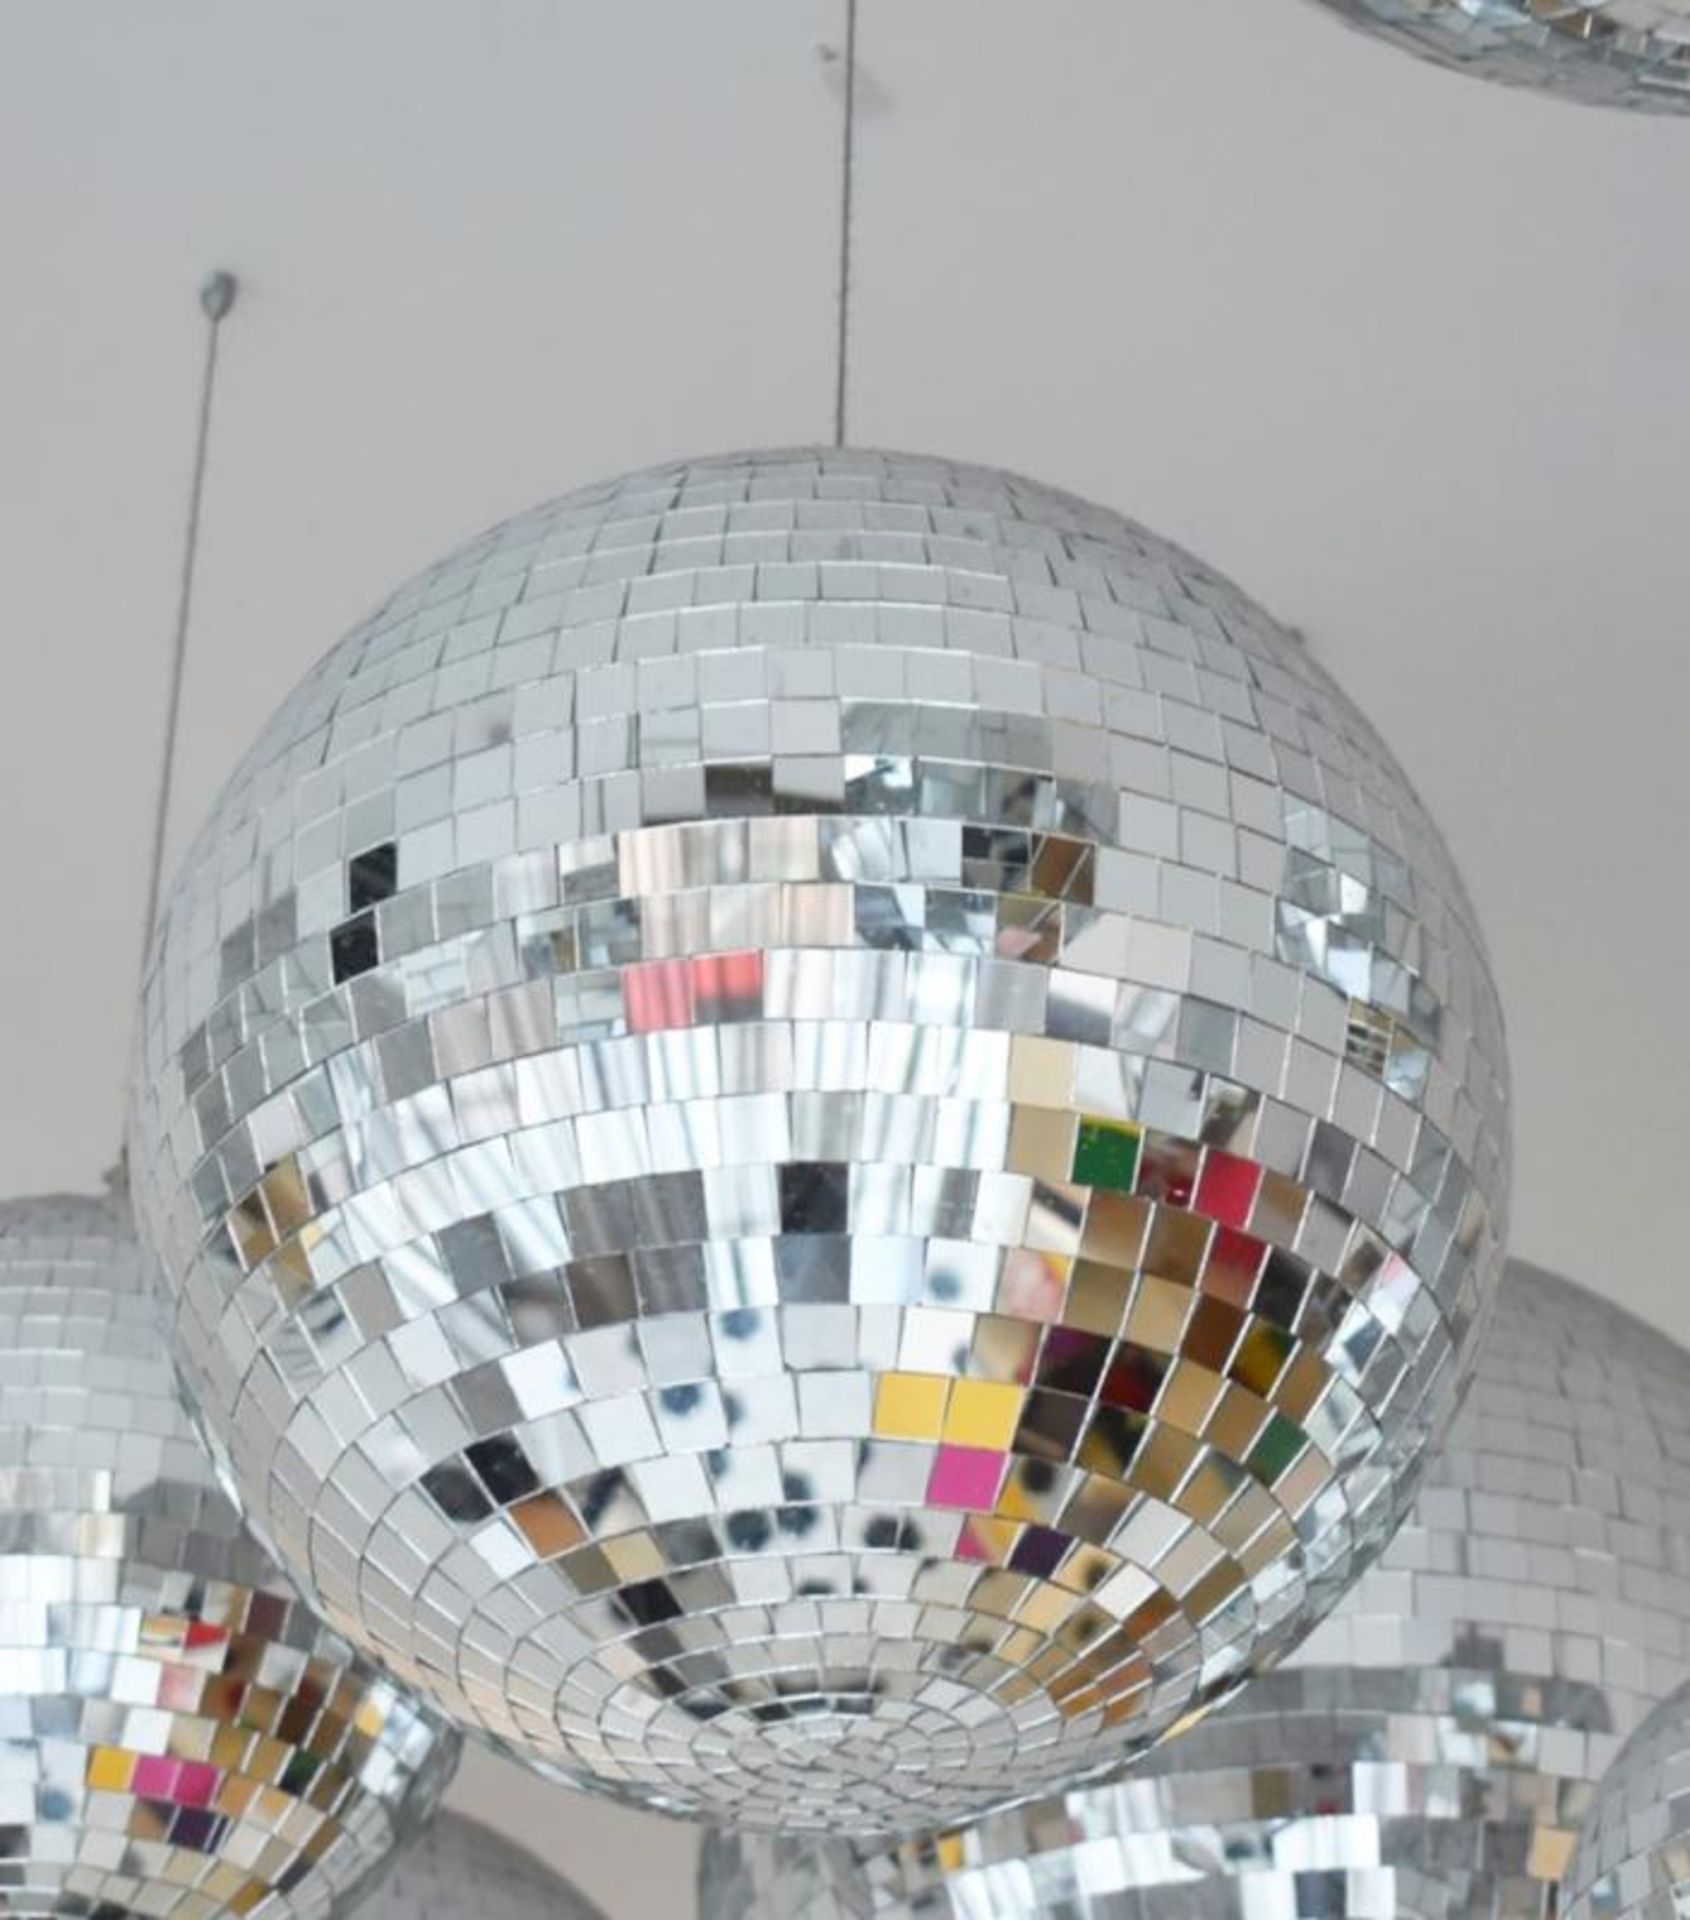 5 x Disco Mirror Glitter Balls - Ceiling Mounted - Will Include Various Sizes From Small to Large - - Image 4 of 4